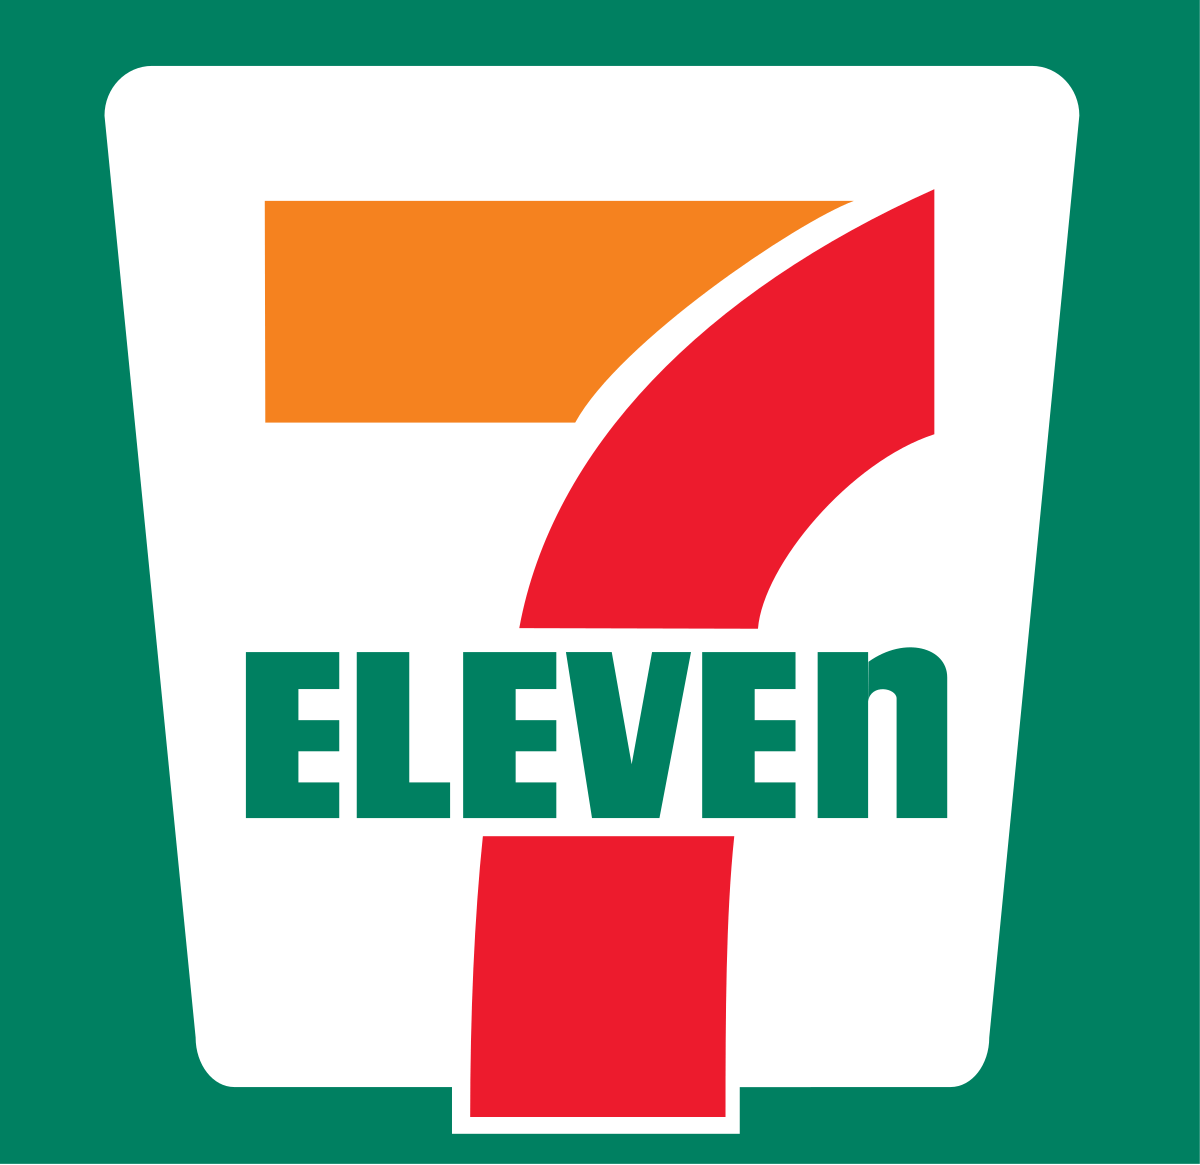 Grocery Store Starts with T Logo - 7-Eleven